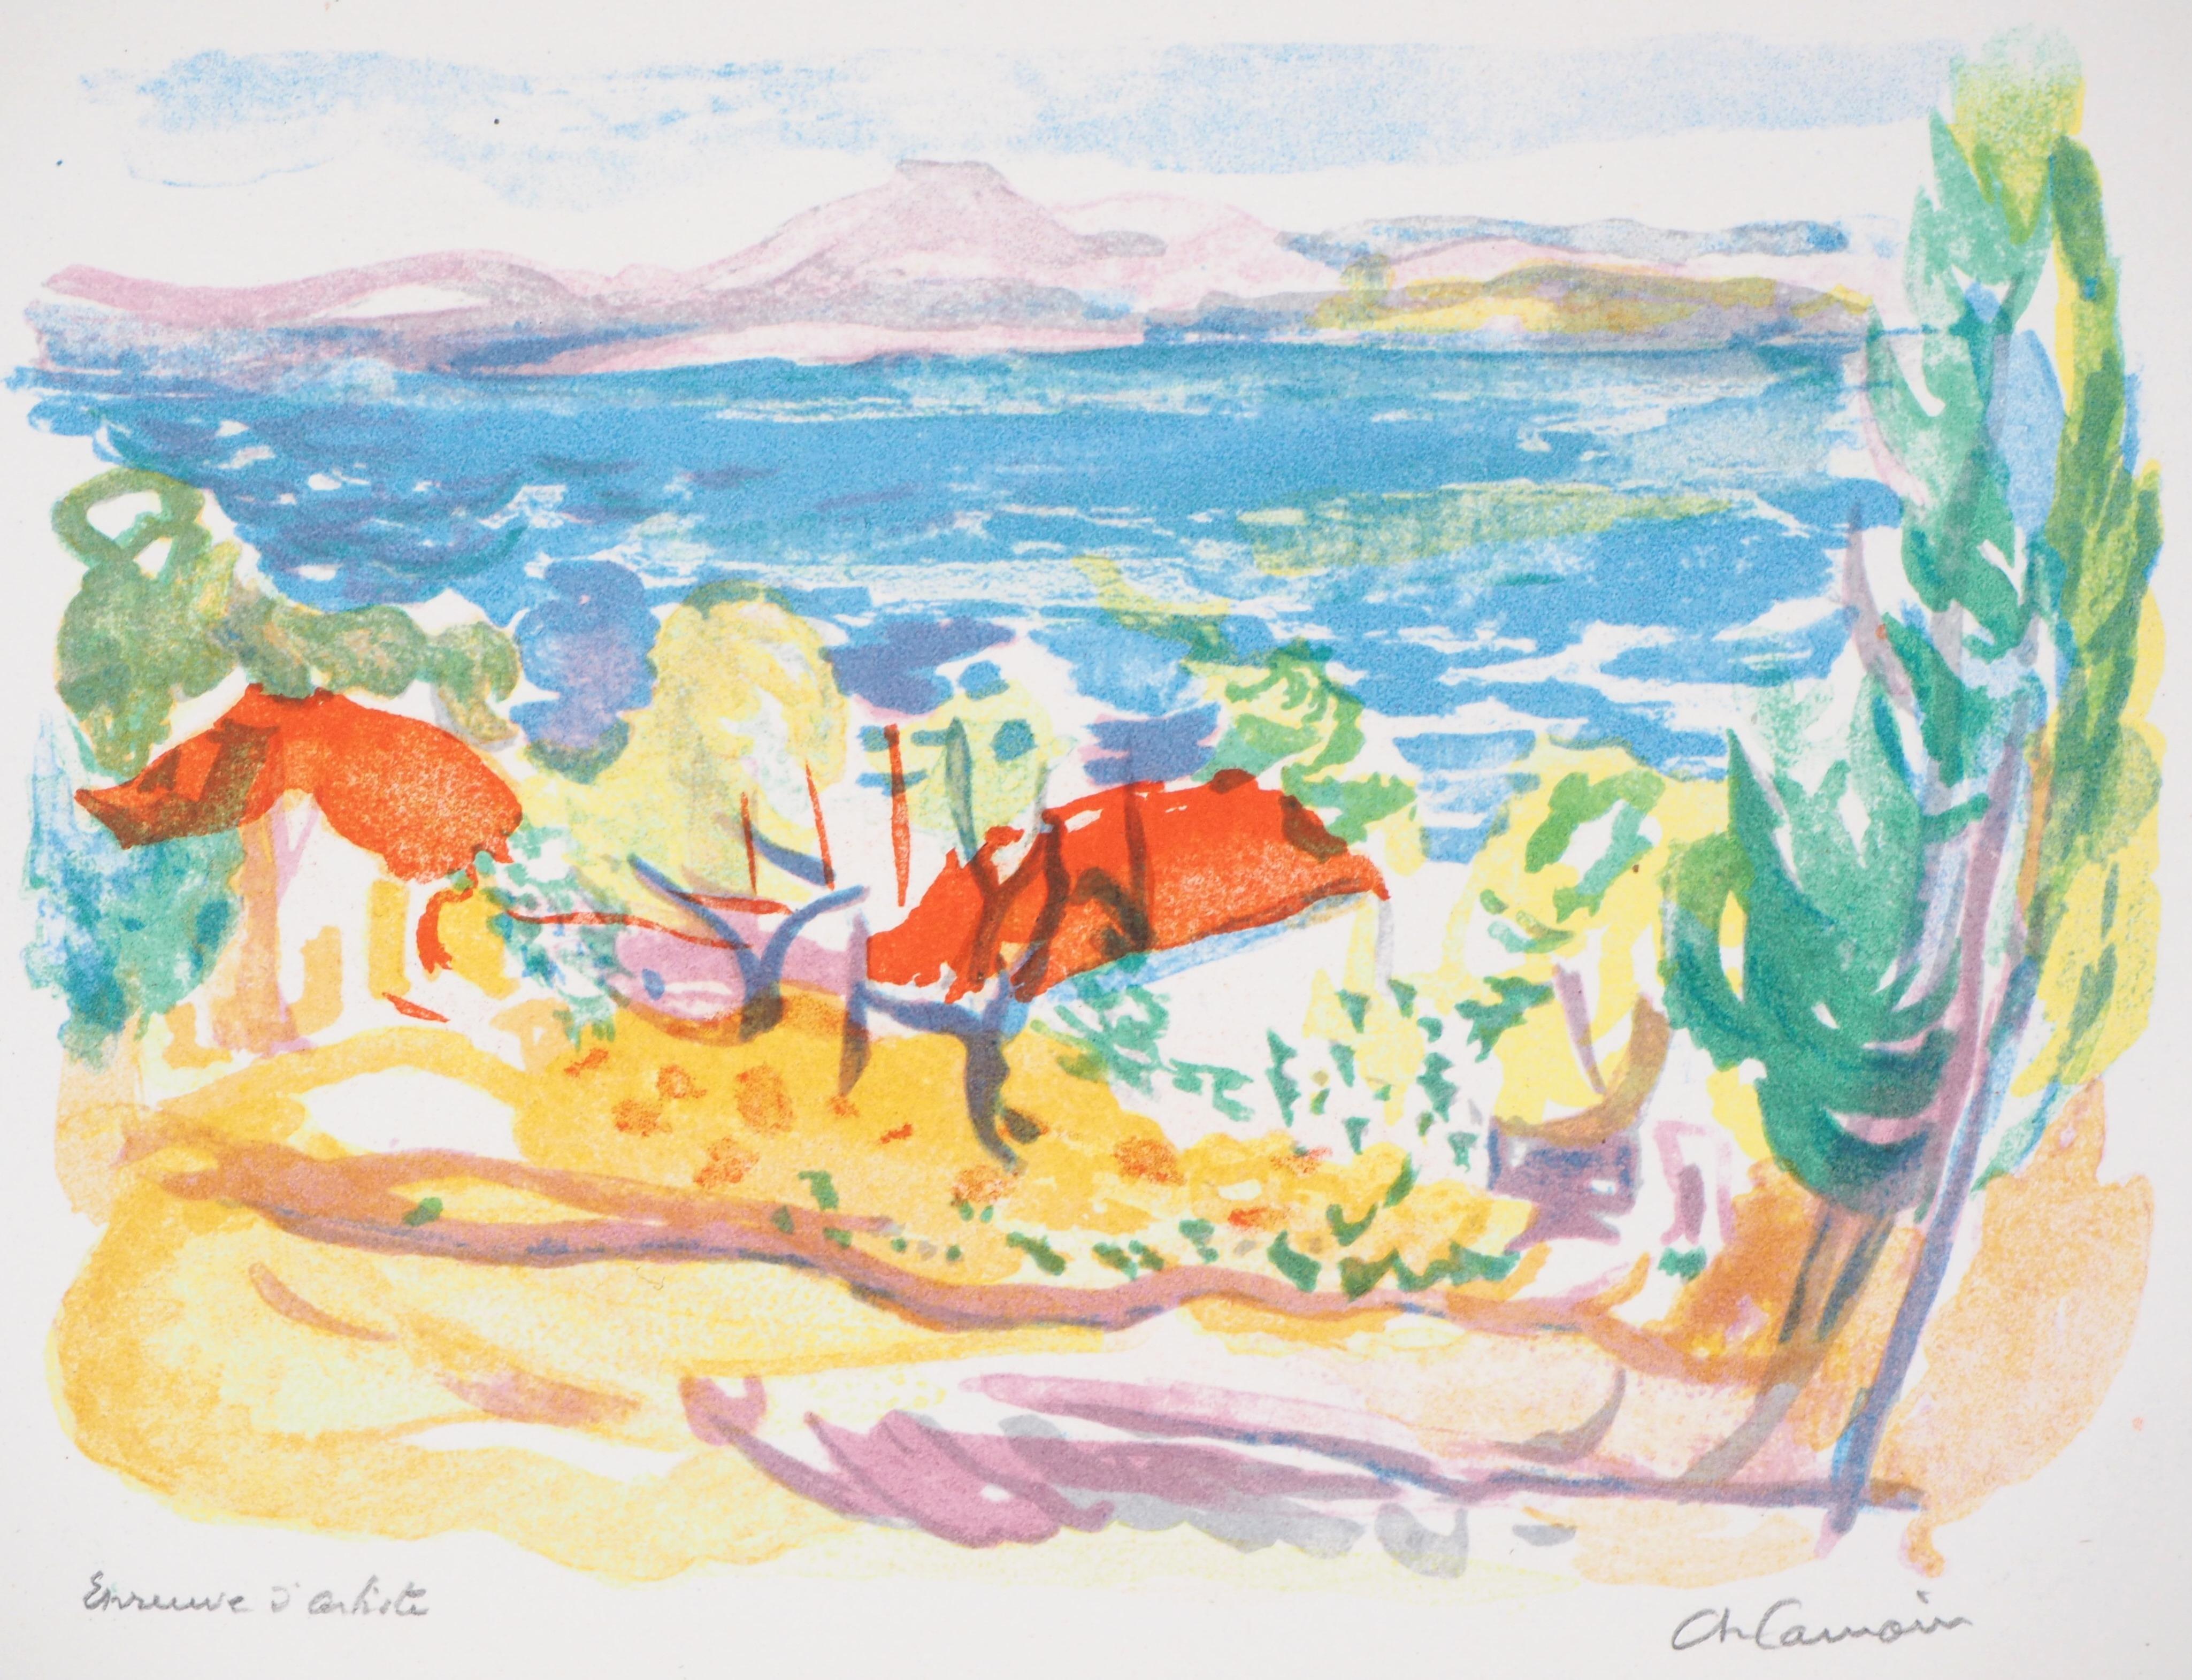 Charles Camoin Landscape Print - Sea Side - Original Lithograph - Signed